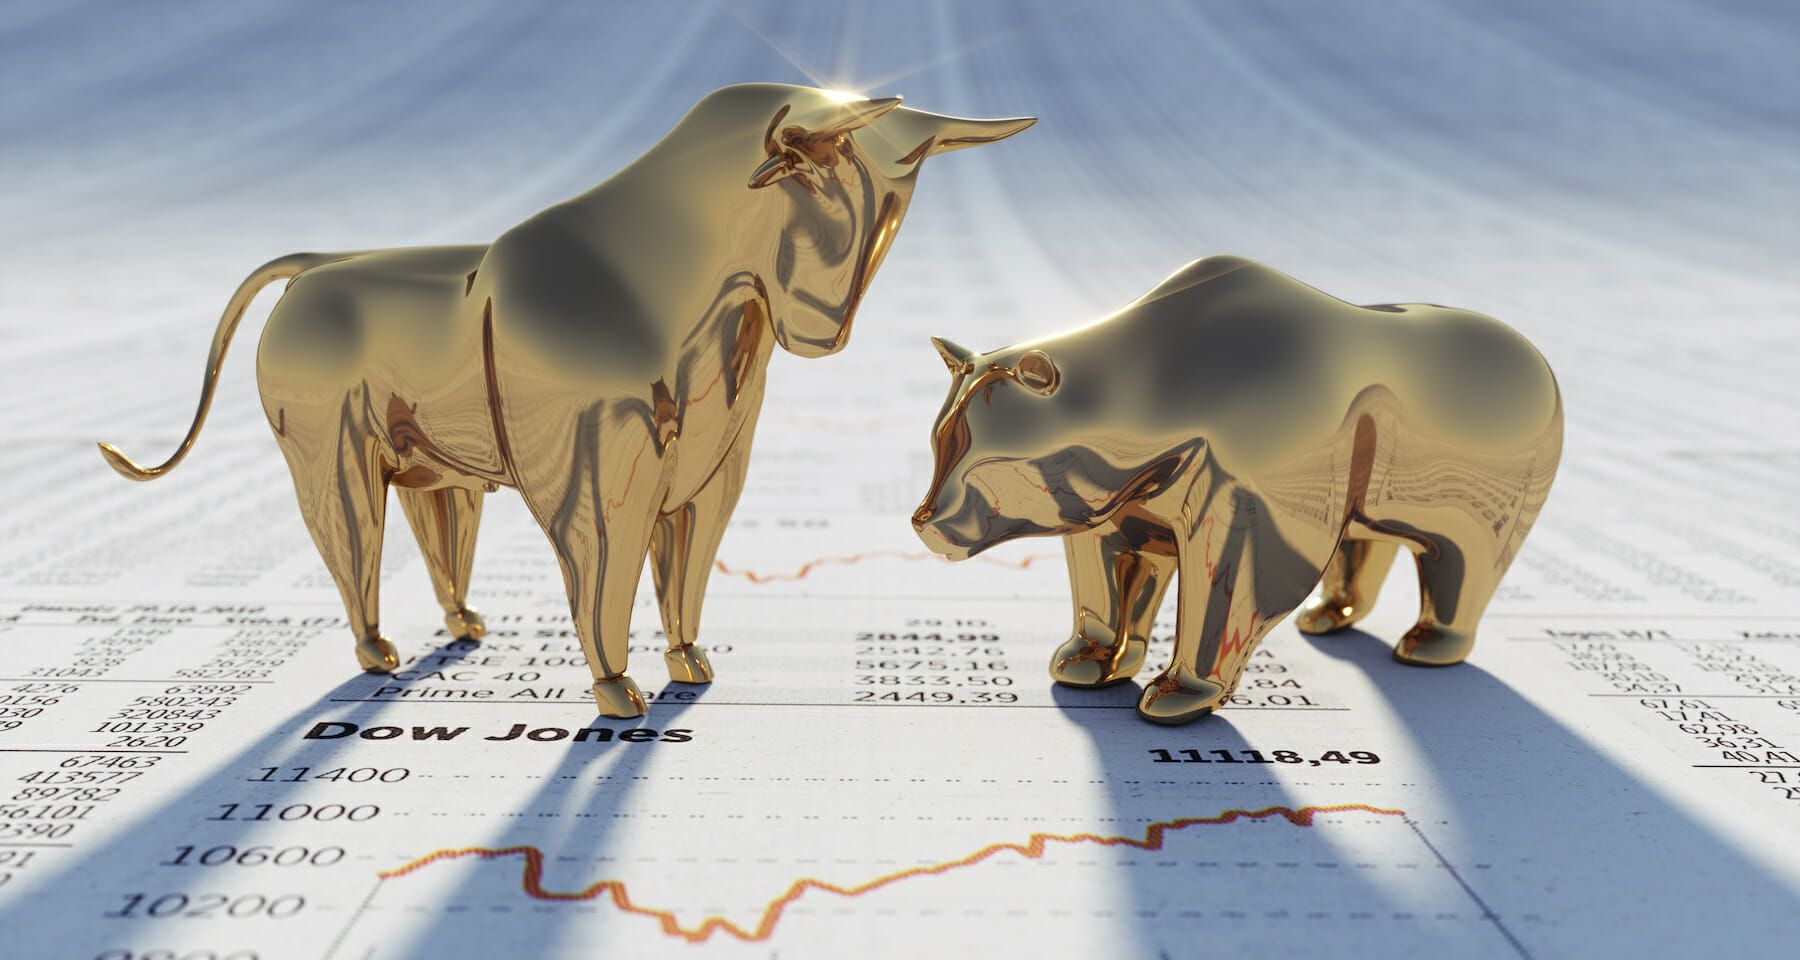 Dow Jones Industrial Average (DJIA) - Overview, History, &amp; Components